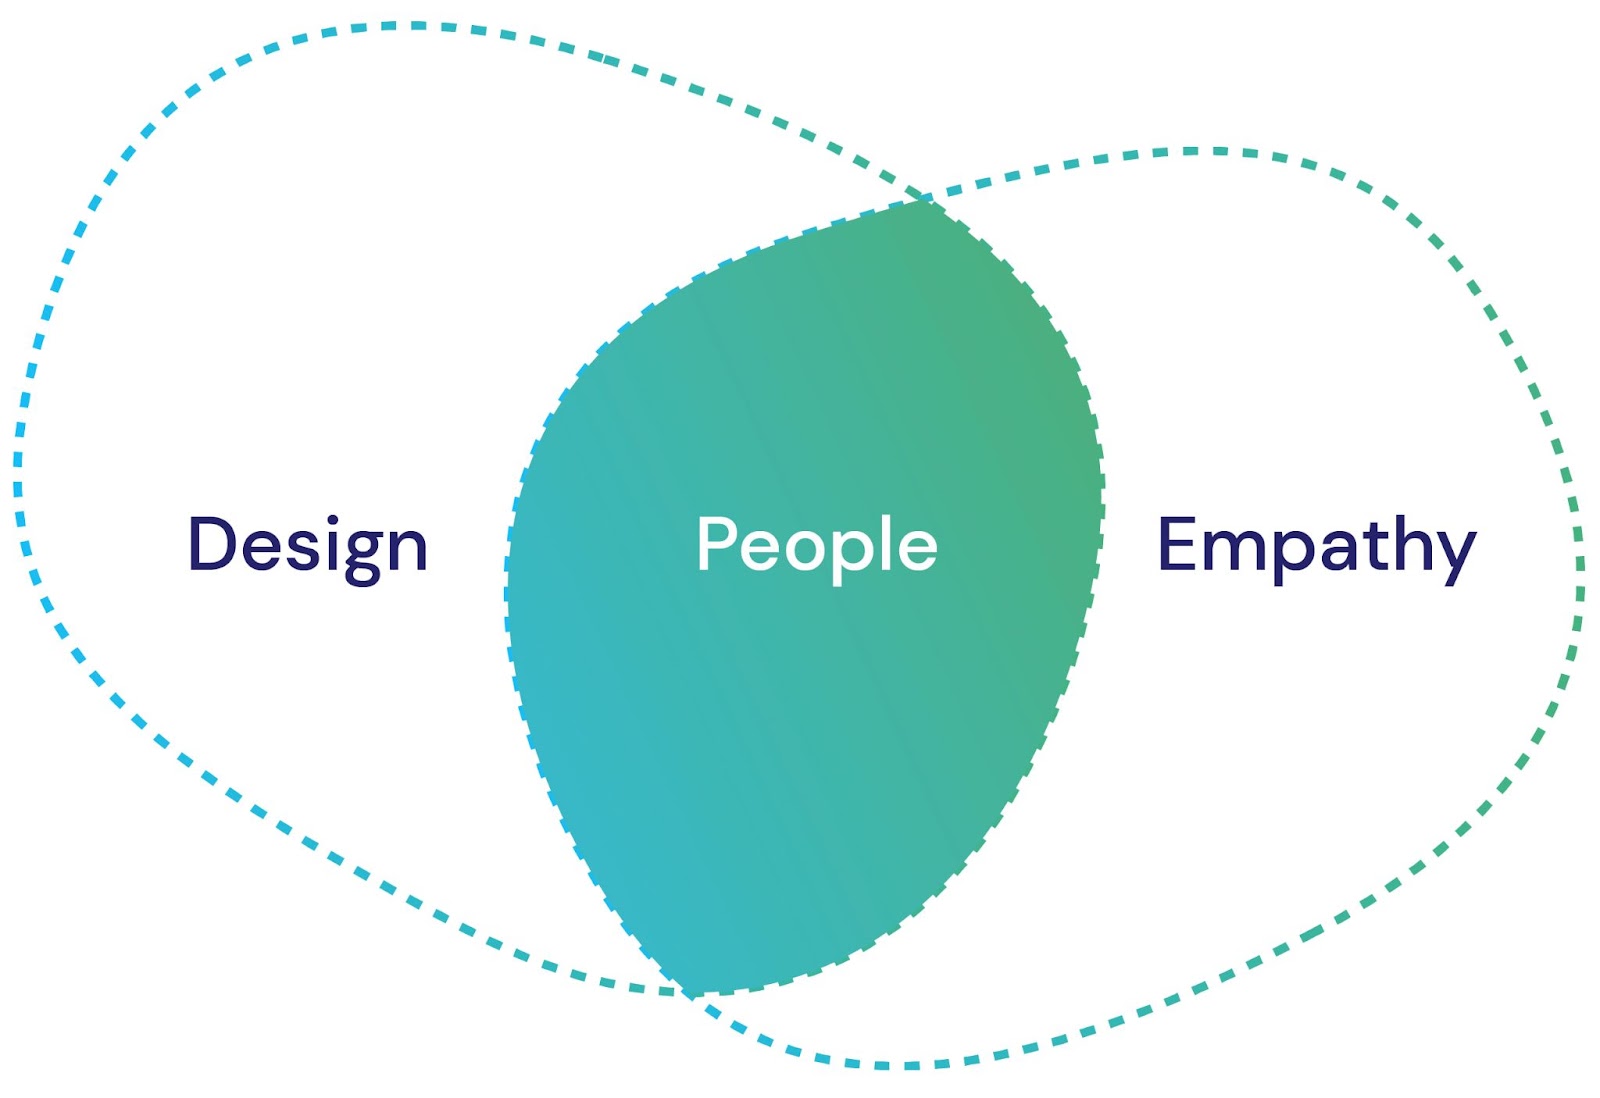 Venn diagram of Design, Empathy and People in the centre